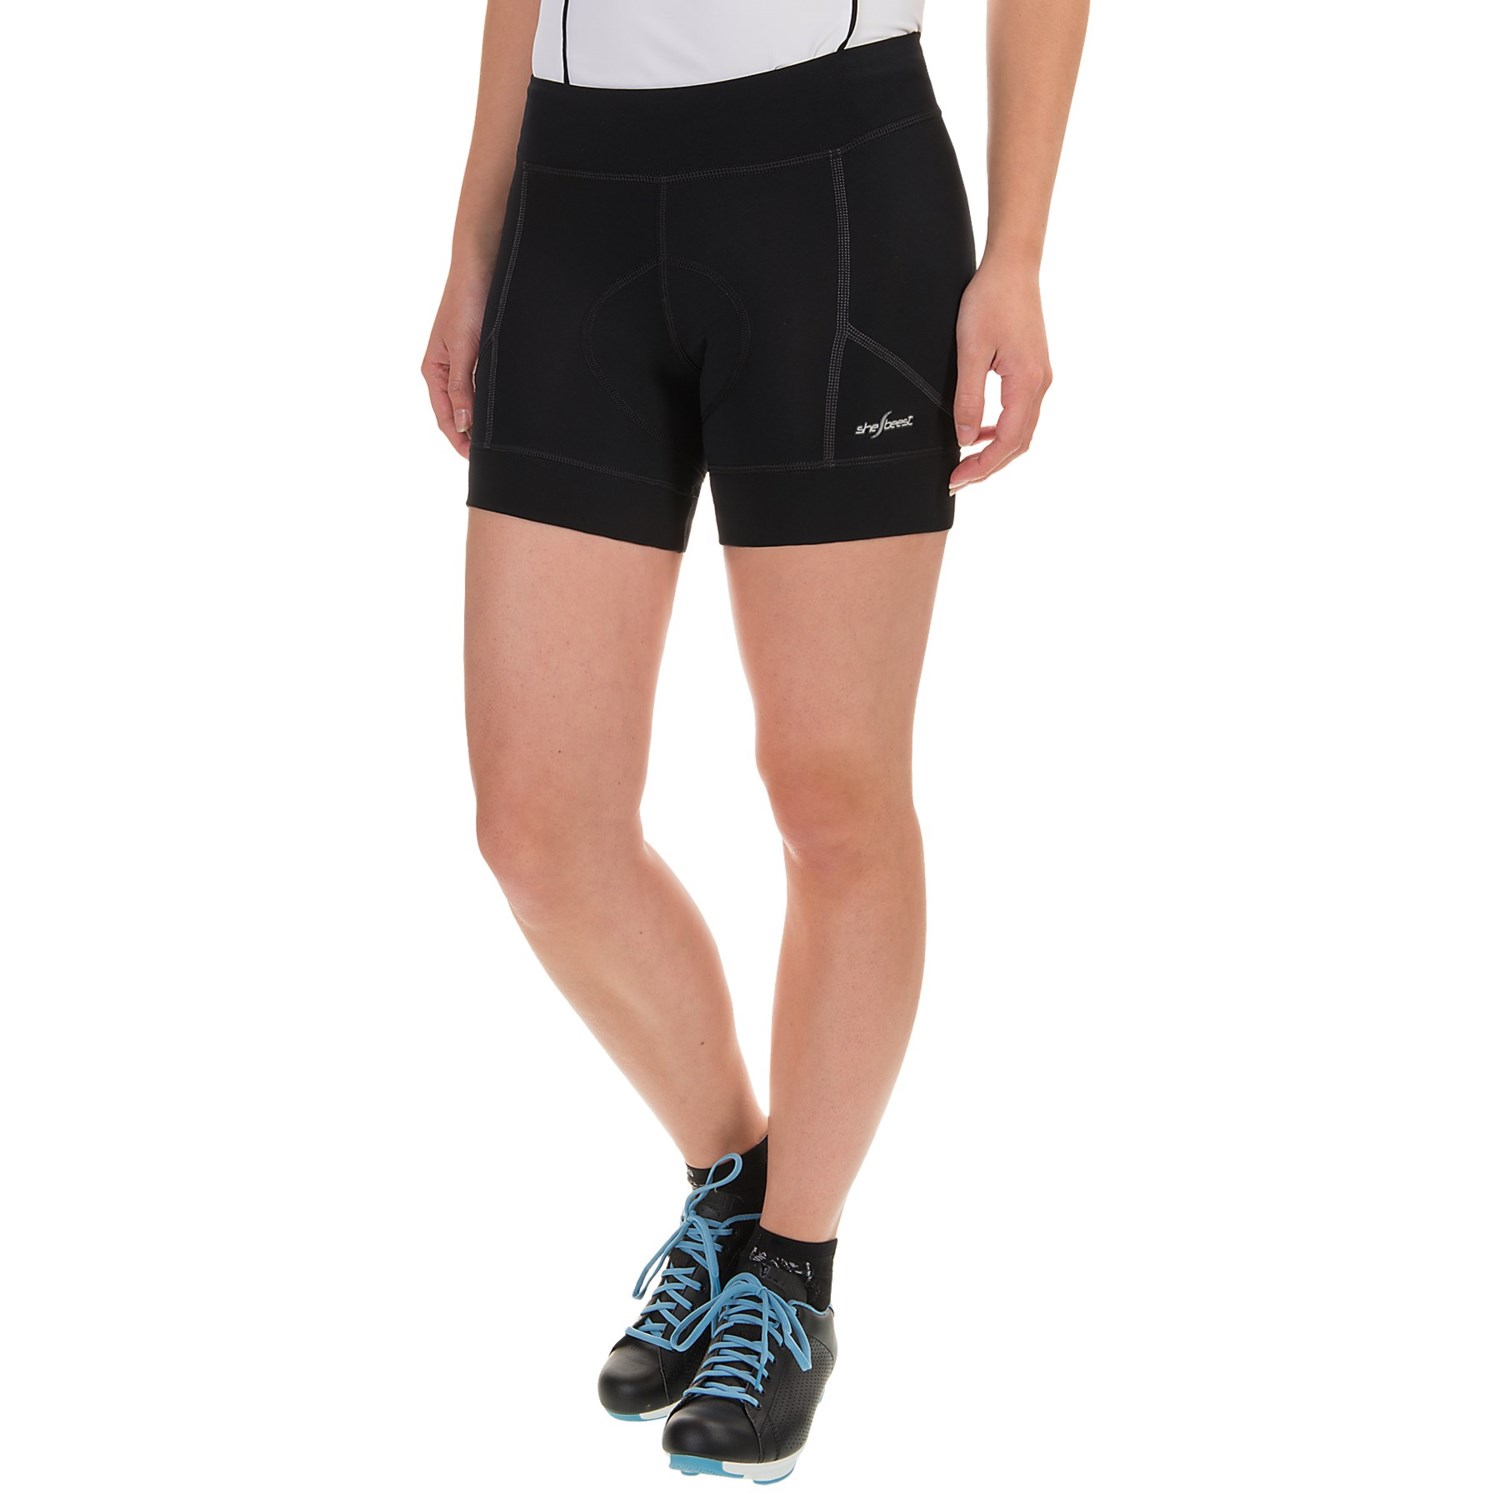 Shebeest RPM 5.5 Cycling Shorts – Contoured Fit (For Women)